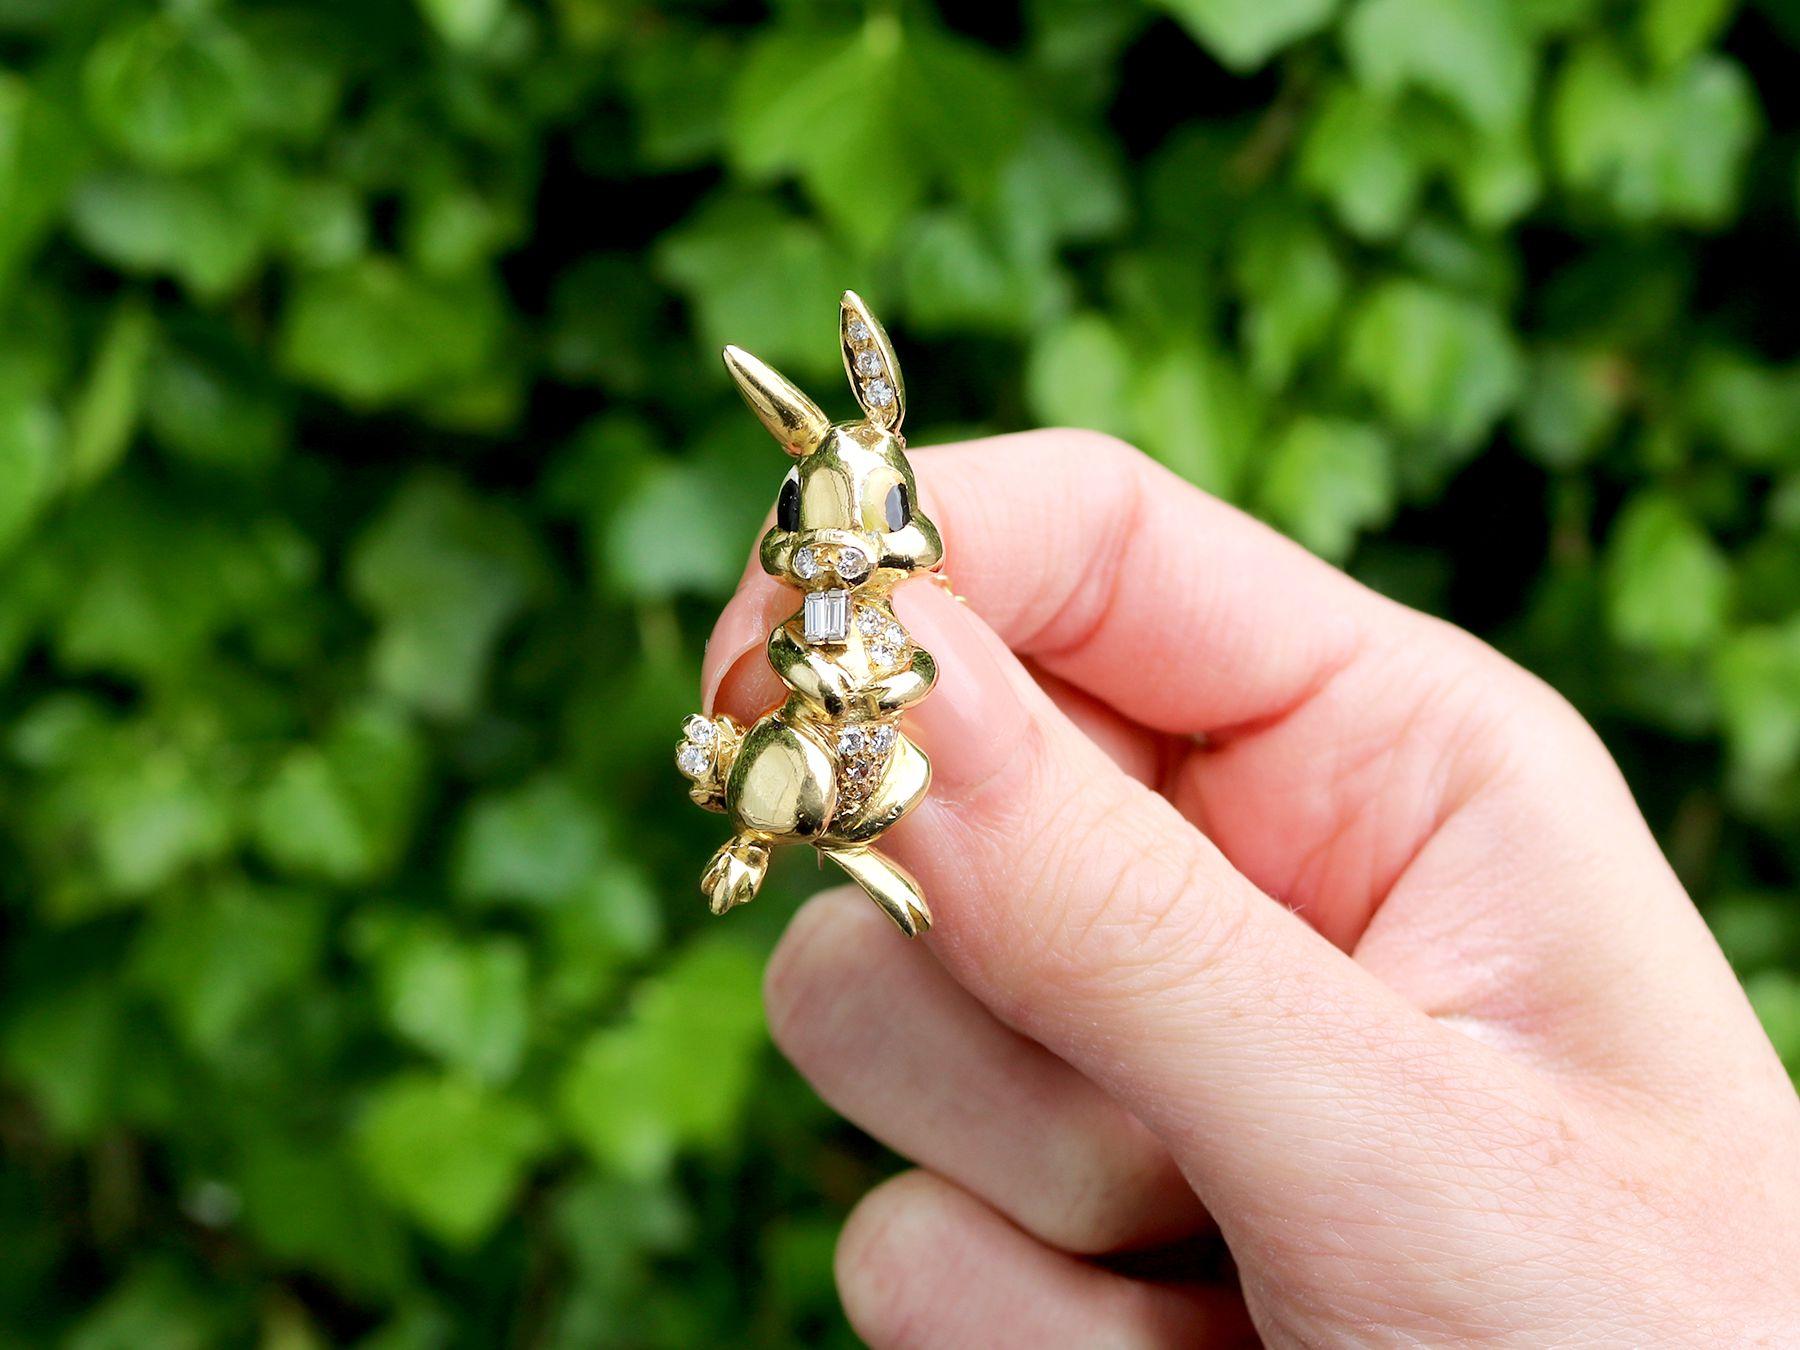 A stunning, fine and impressive 0.32 carat diamond, 18 karat yellow gold and 18 karat white gold brooch in the form of a rabbit; part of our diverse diamond jewelry and estate jewelry collections.

This stunning, fine and impressive vintage brooch